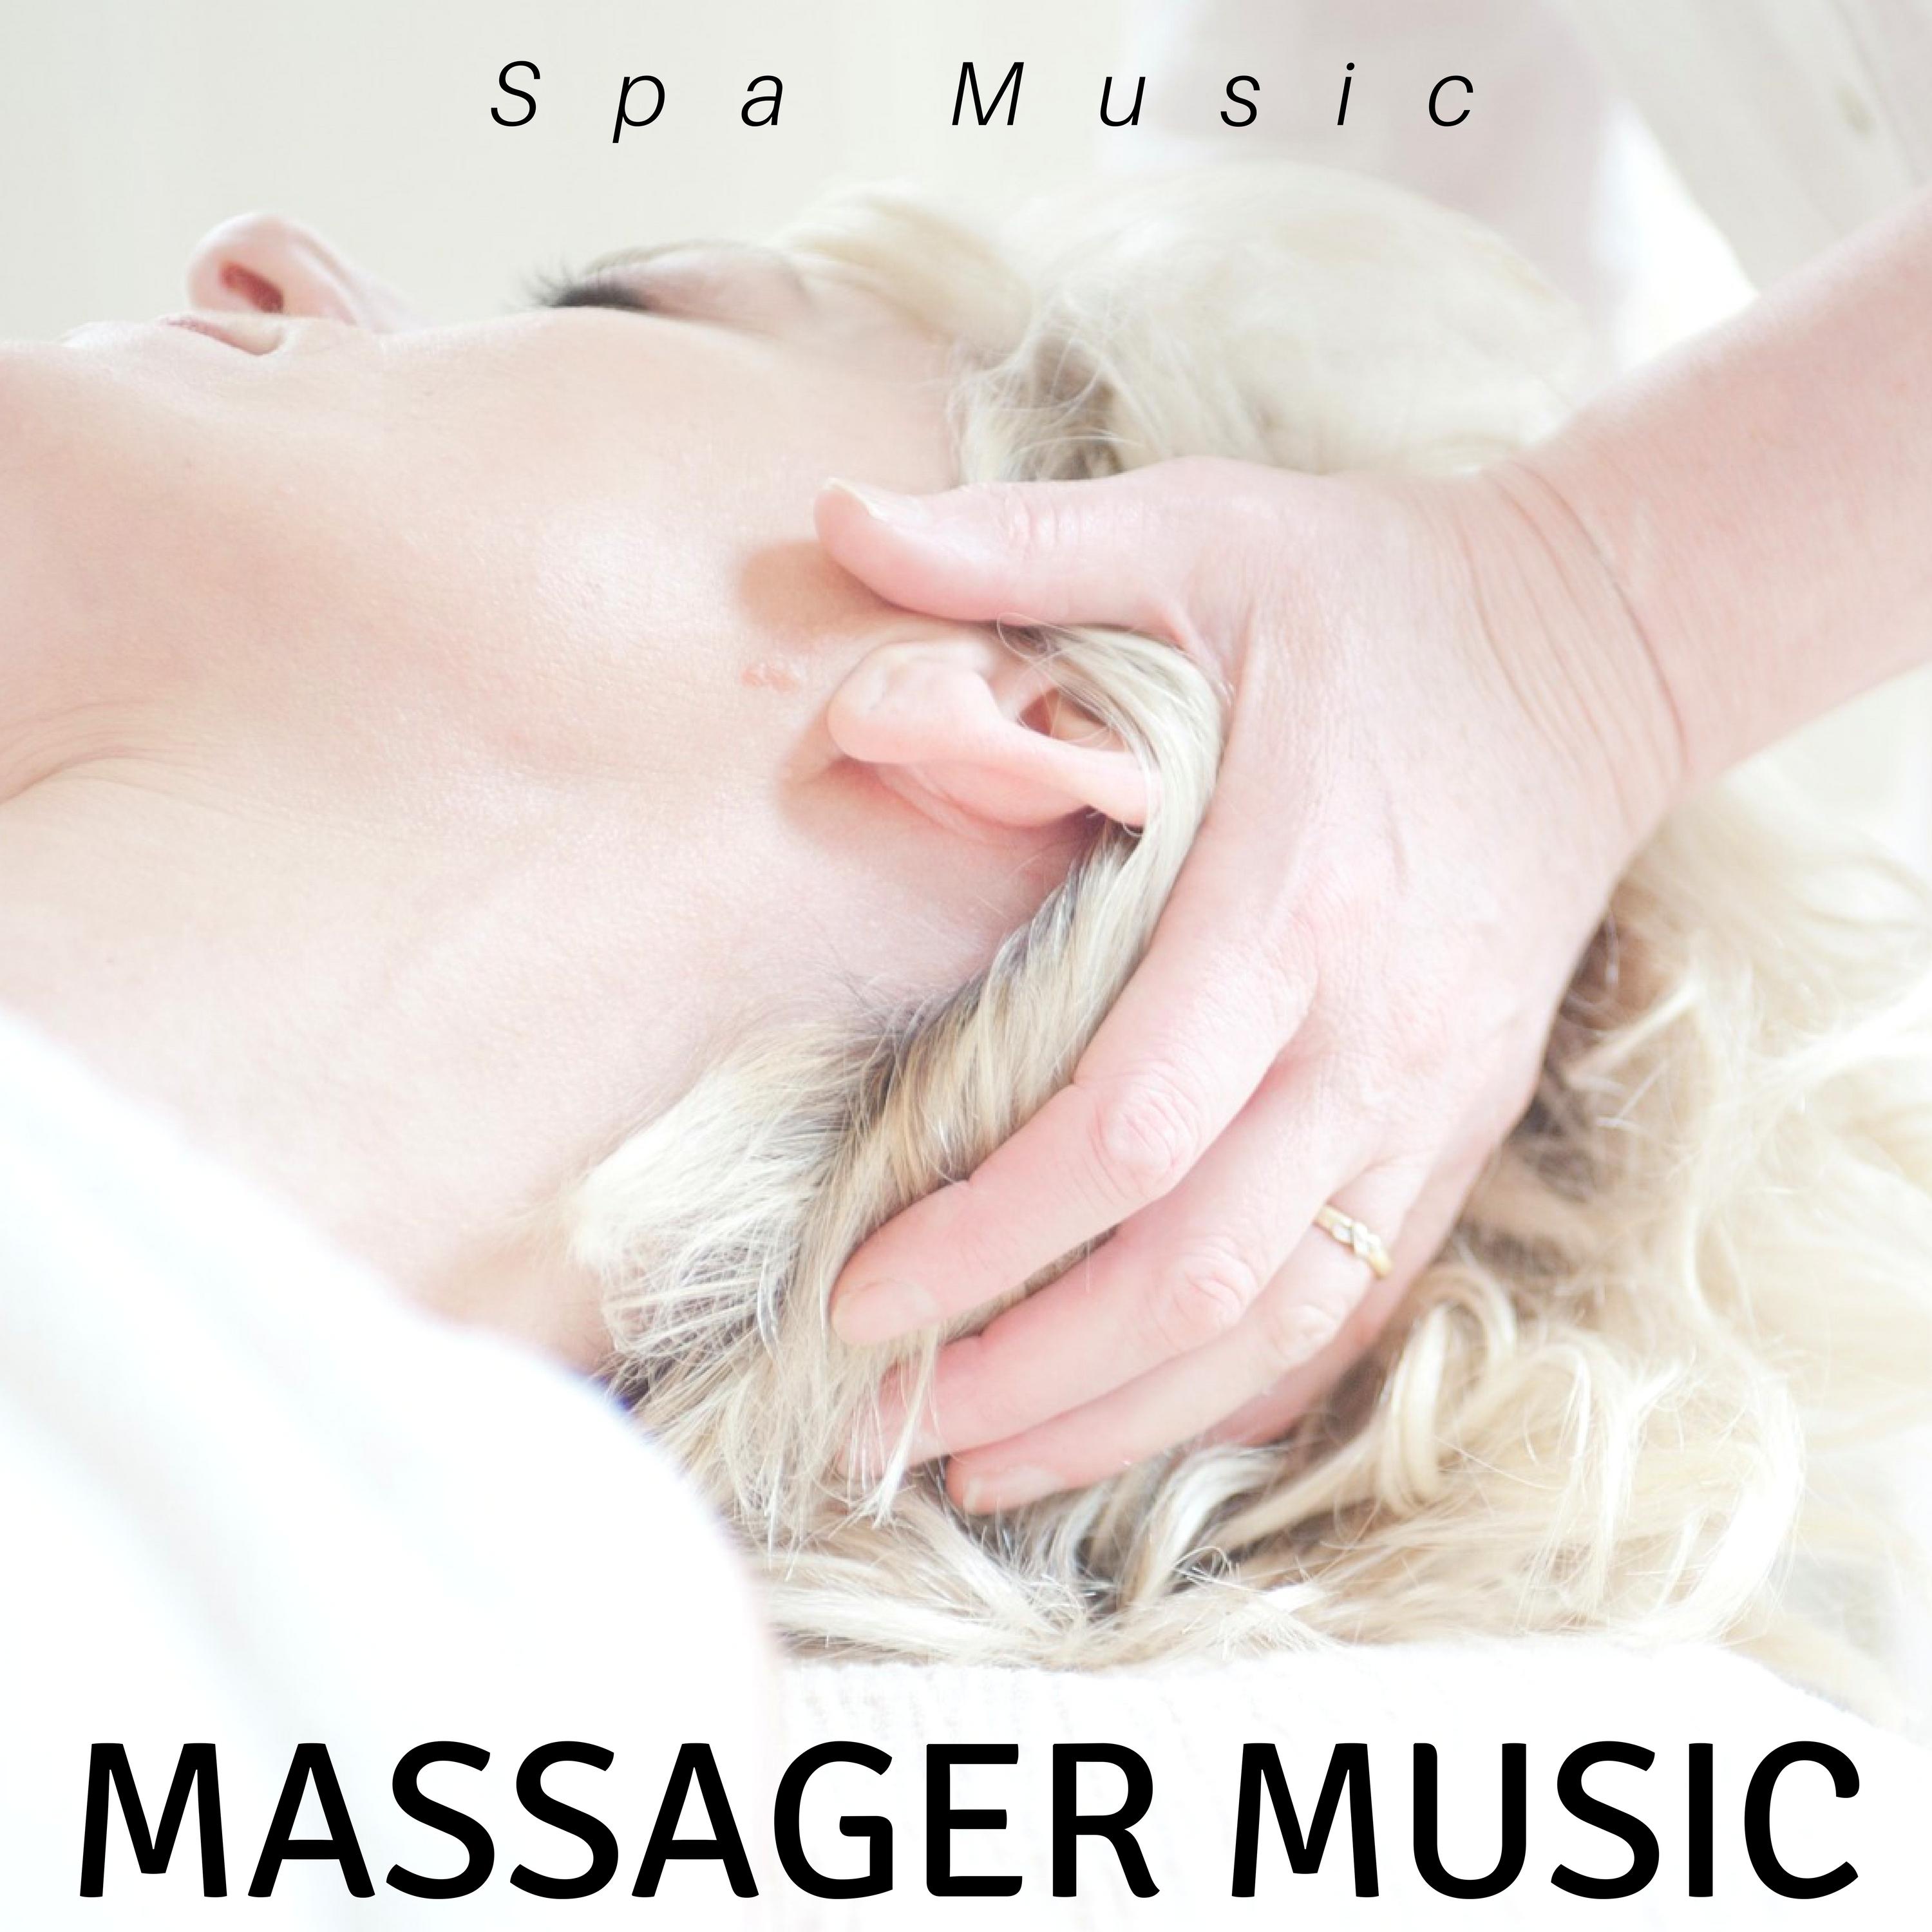 Massager Music - Spa Music, Serenity Songs, Thai Music collection for Healing